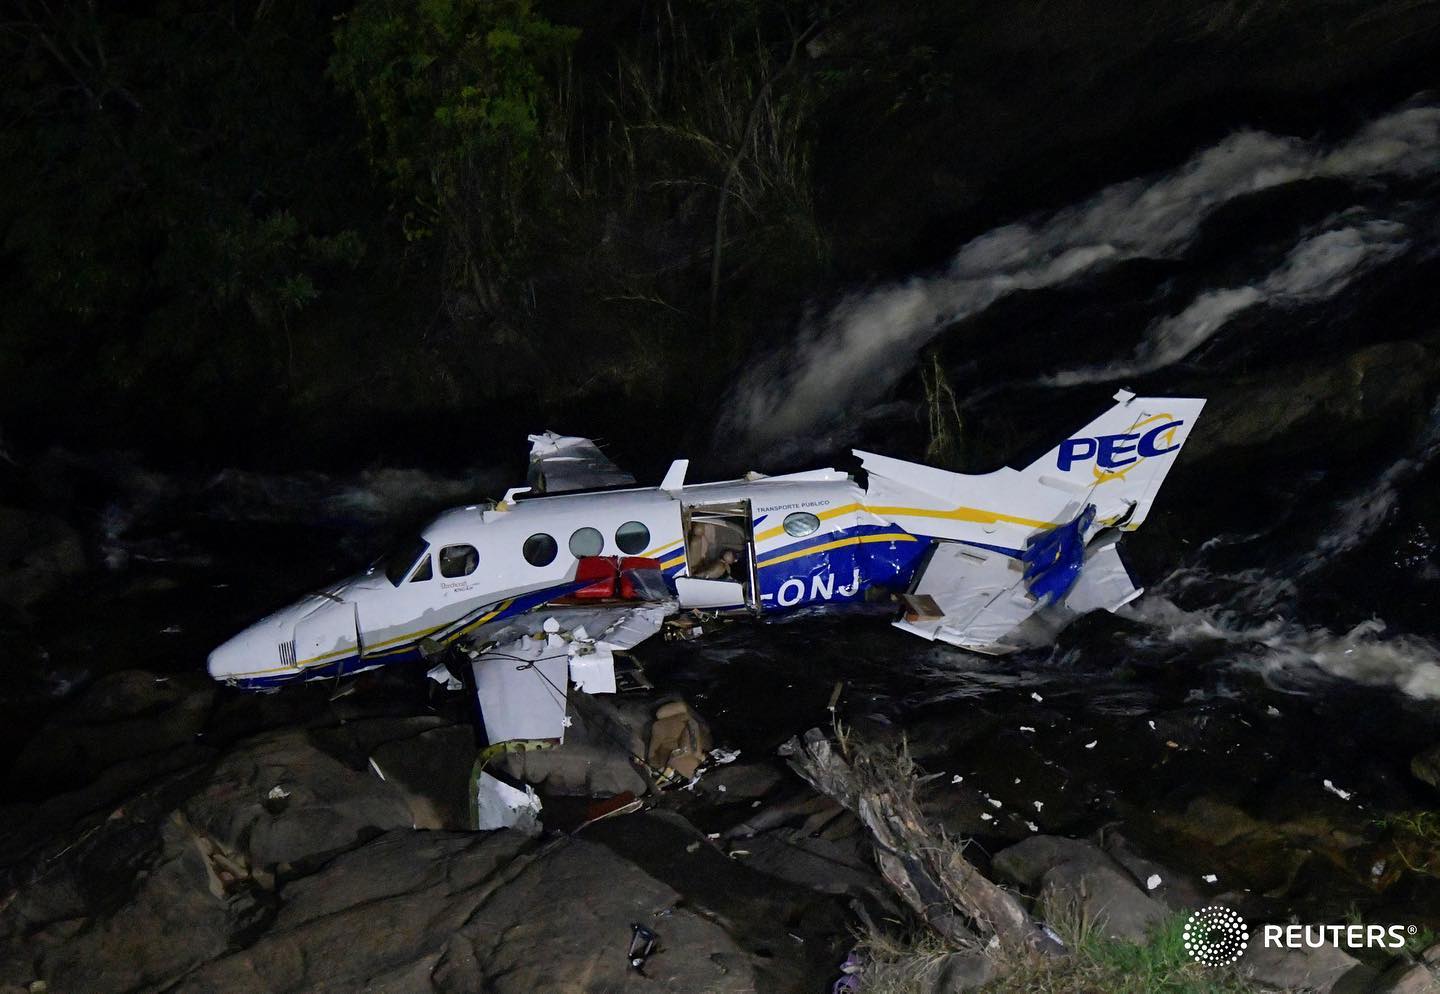 The wreckage of a small airplane that crashed with Brazilian country singer Marilia Mendonca, 26, aboard lies near a waterfall area in Piedade de Caratinga, state of Minas Gerais, Brazil, November 5, 2021 (Source: Reuters).